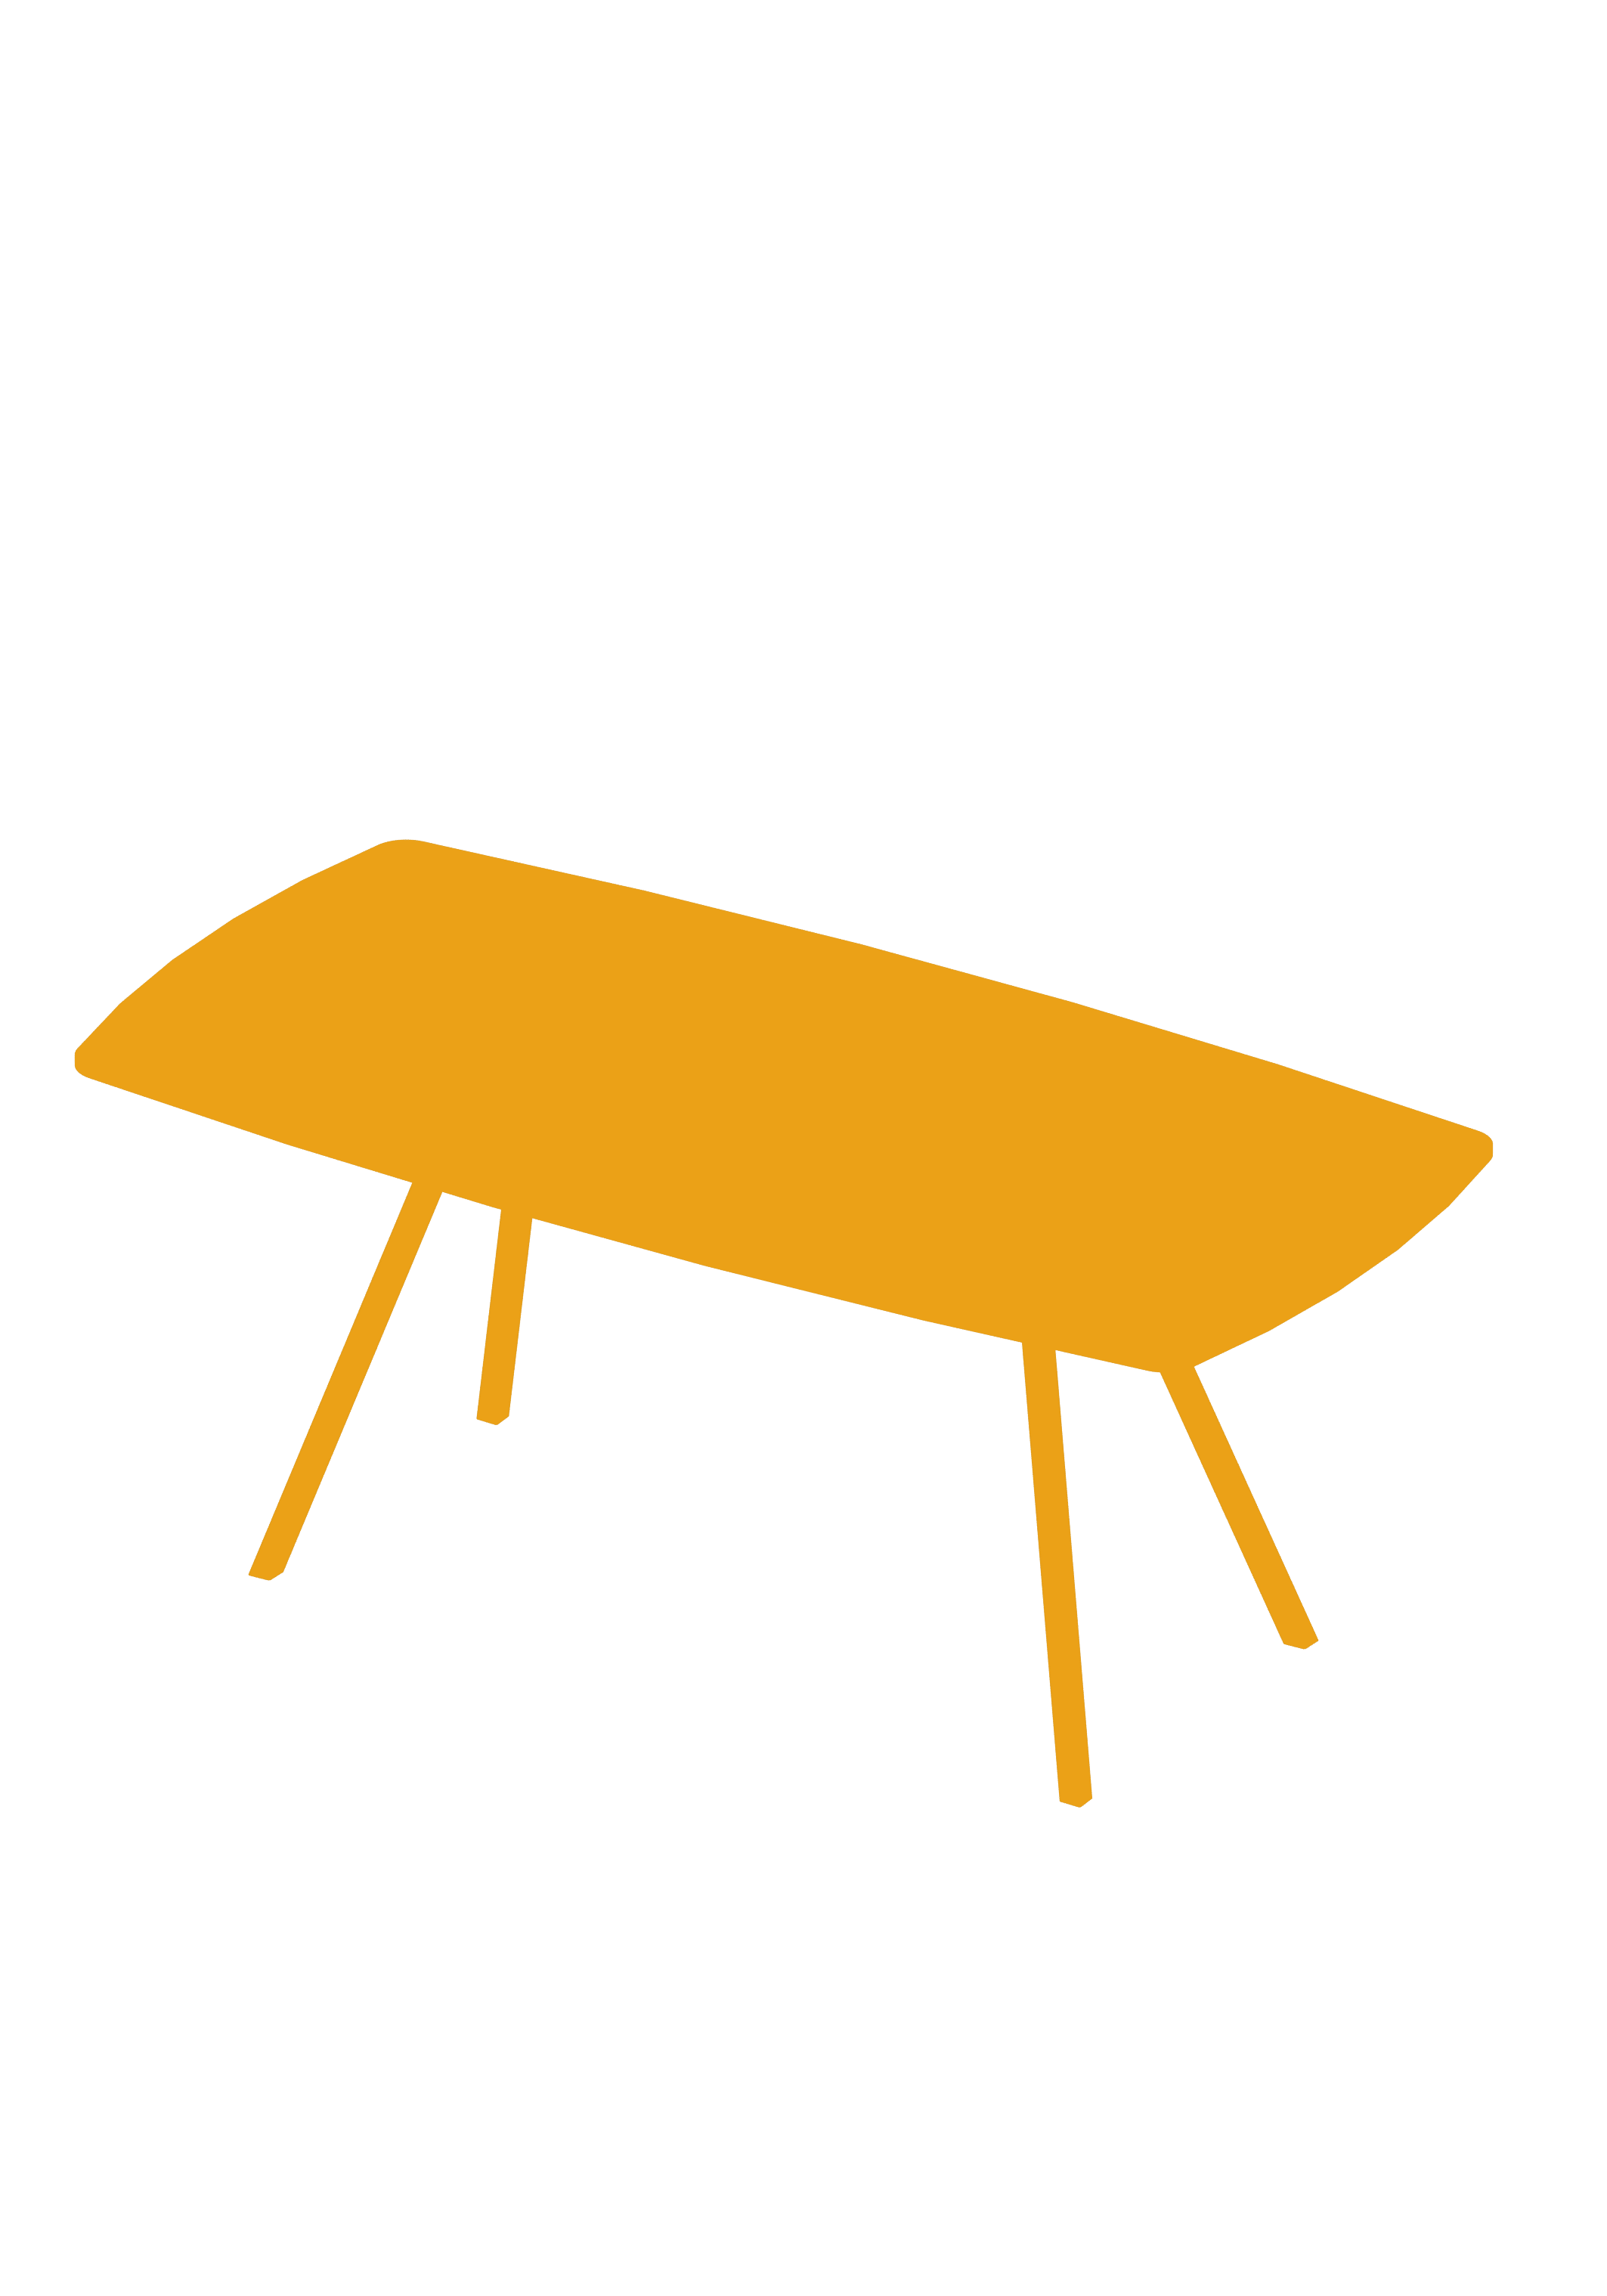 Poise Timber Table  X  copy